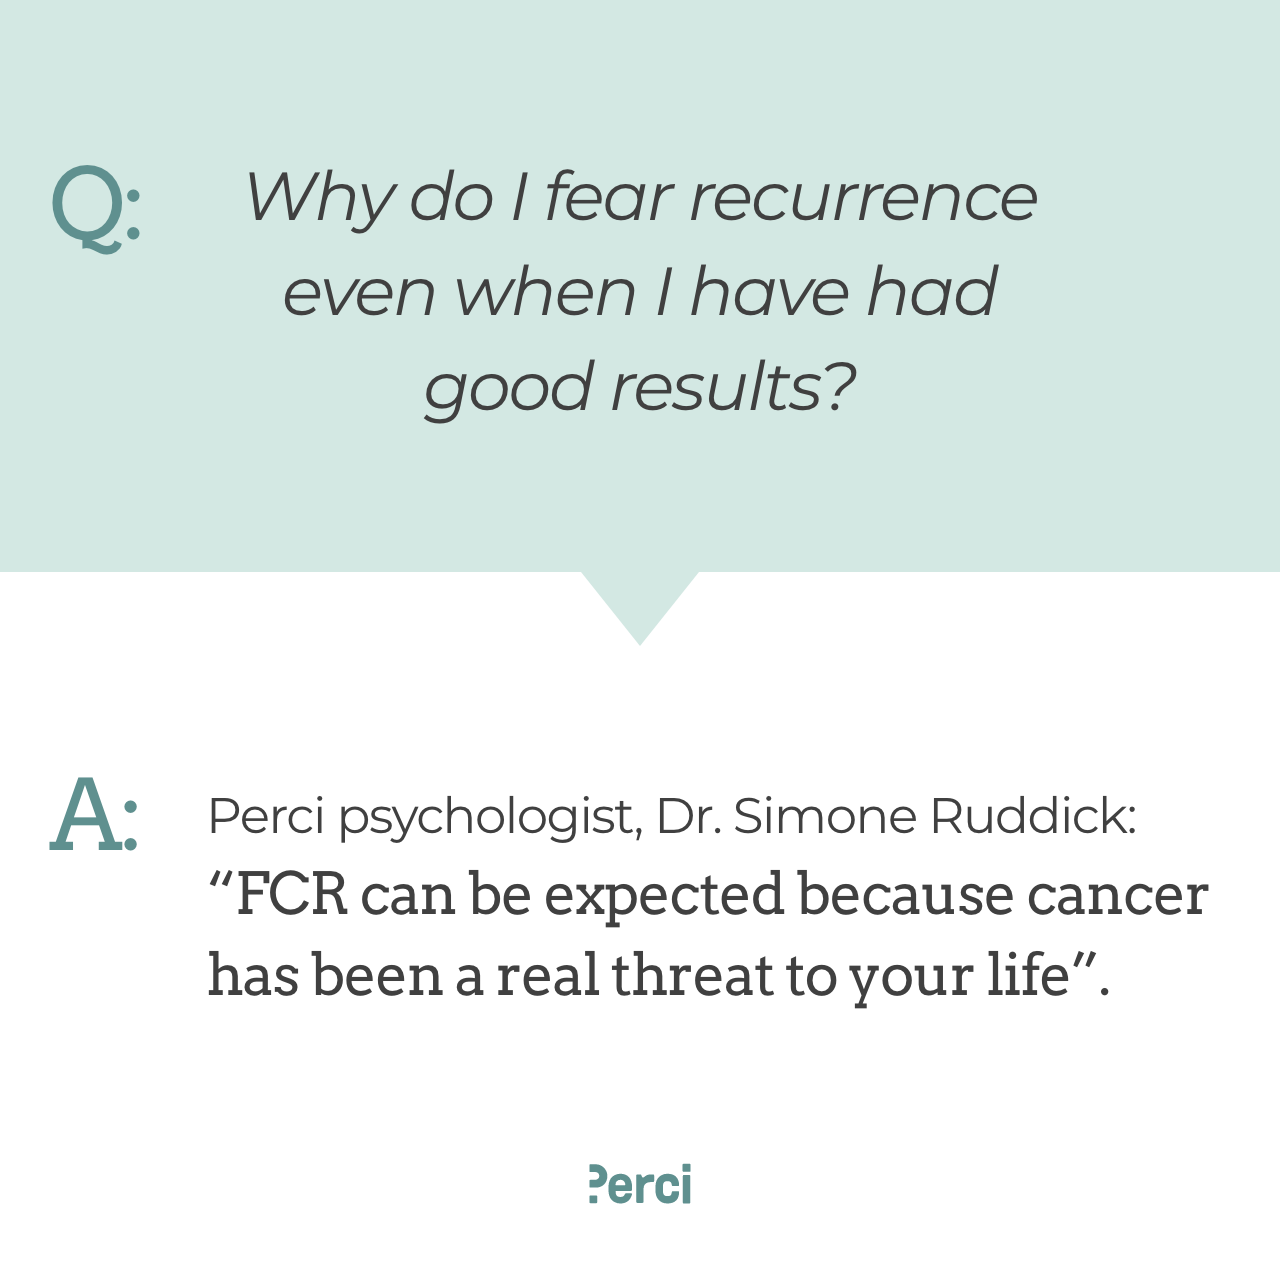 An image featuring text, which reads: Question: Why do I fear recurrence even when I have had good results? Answer: Perci psychologist, Dr. Simone Ruddick: "FCR can be expected because cancer has been a real threat to your life".